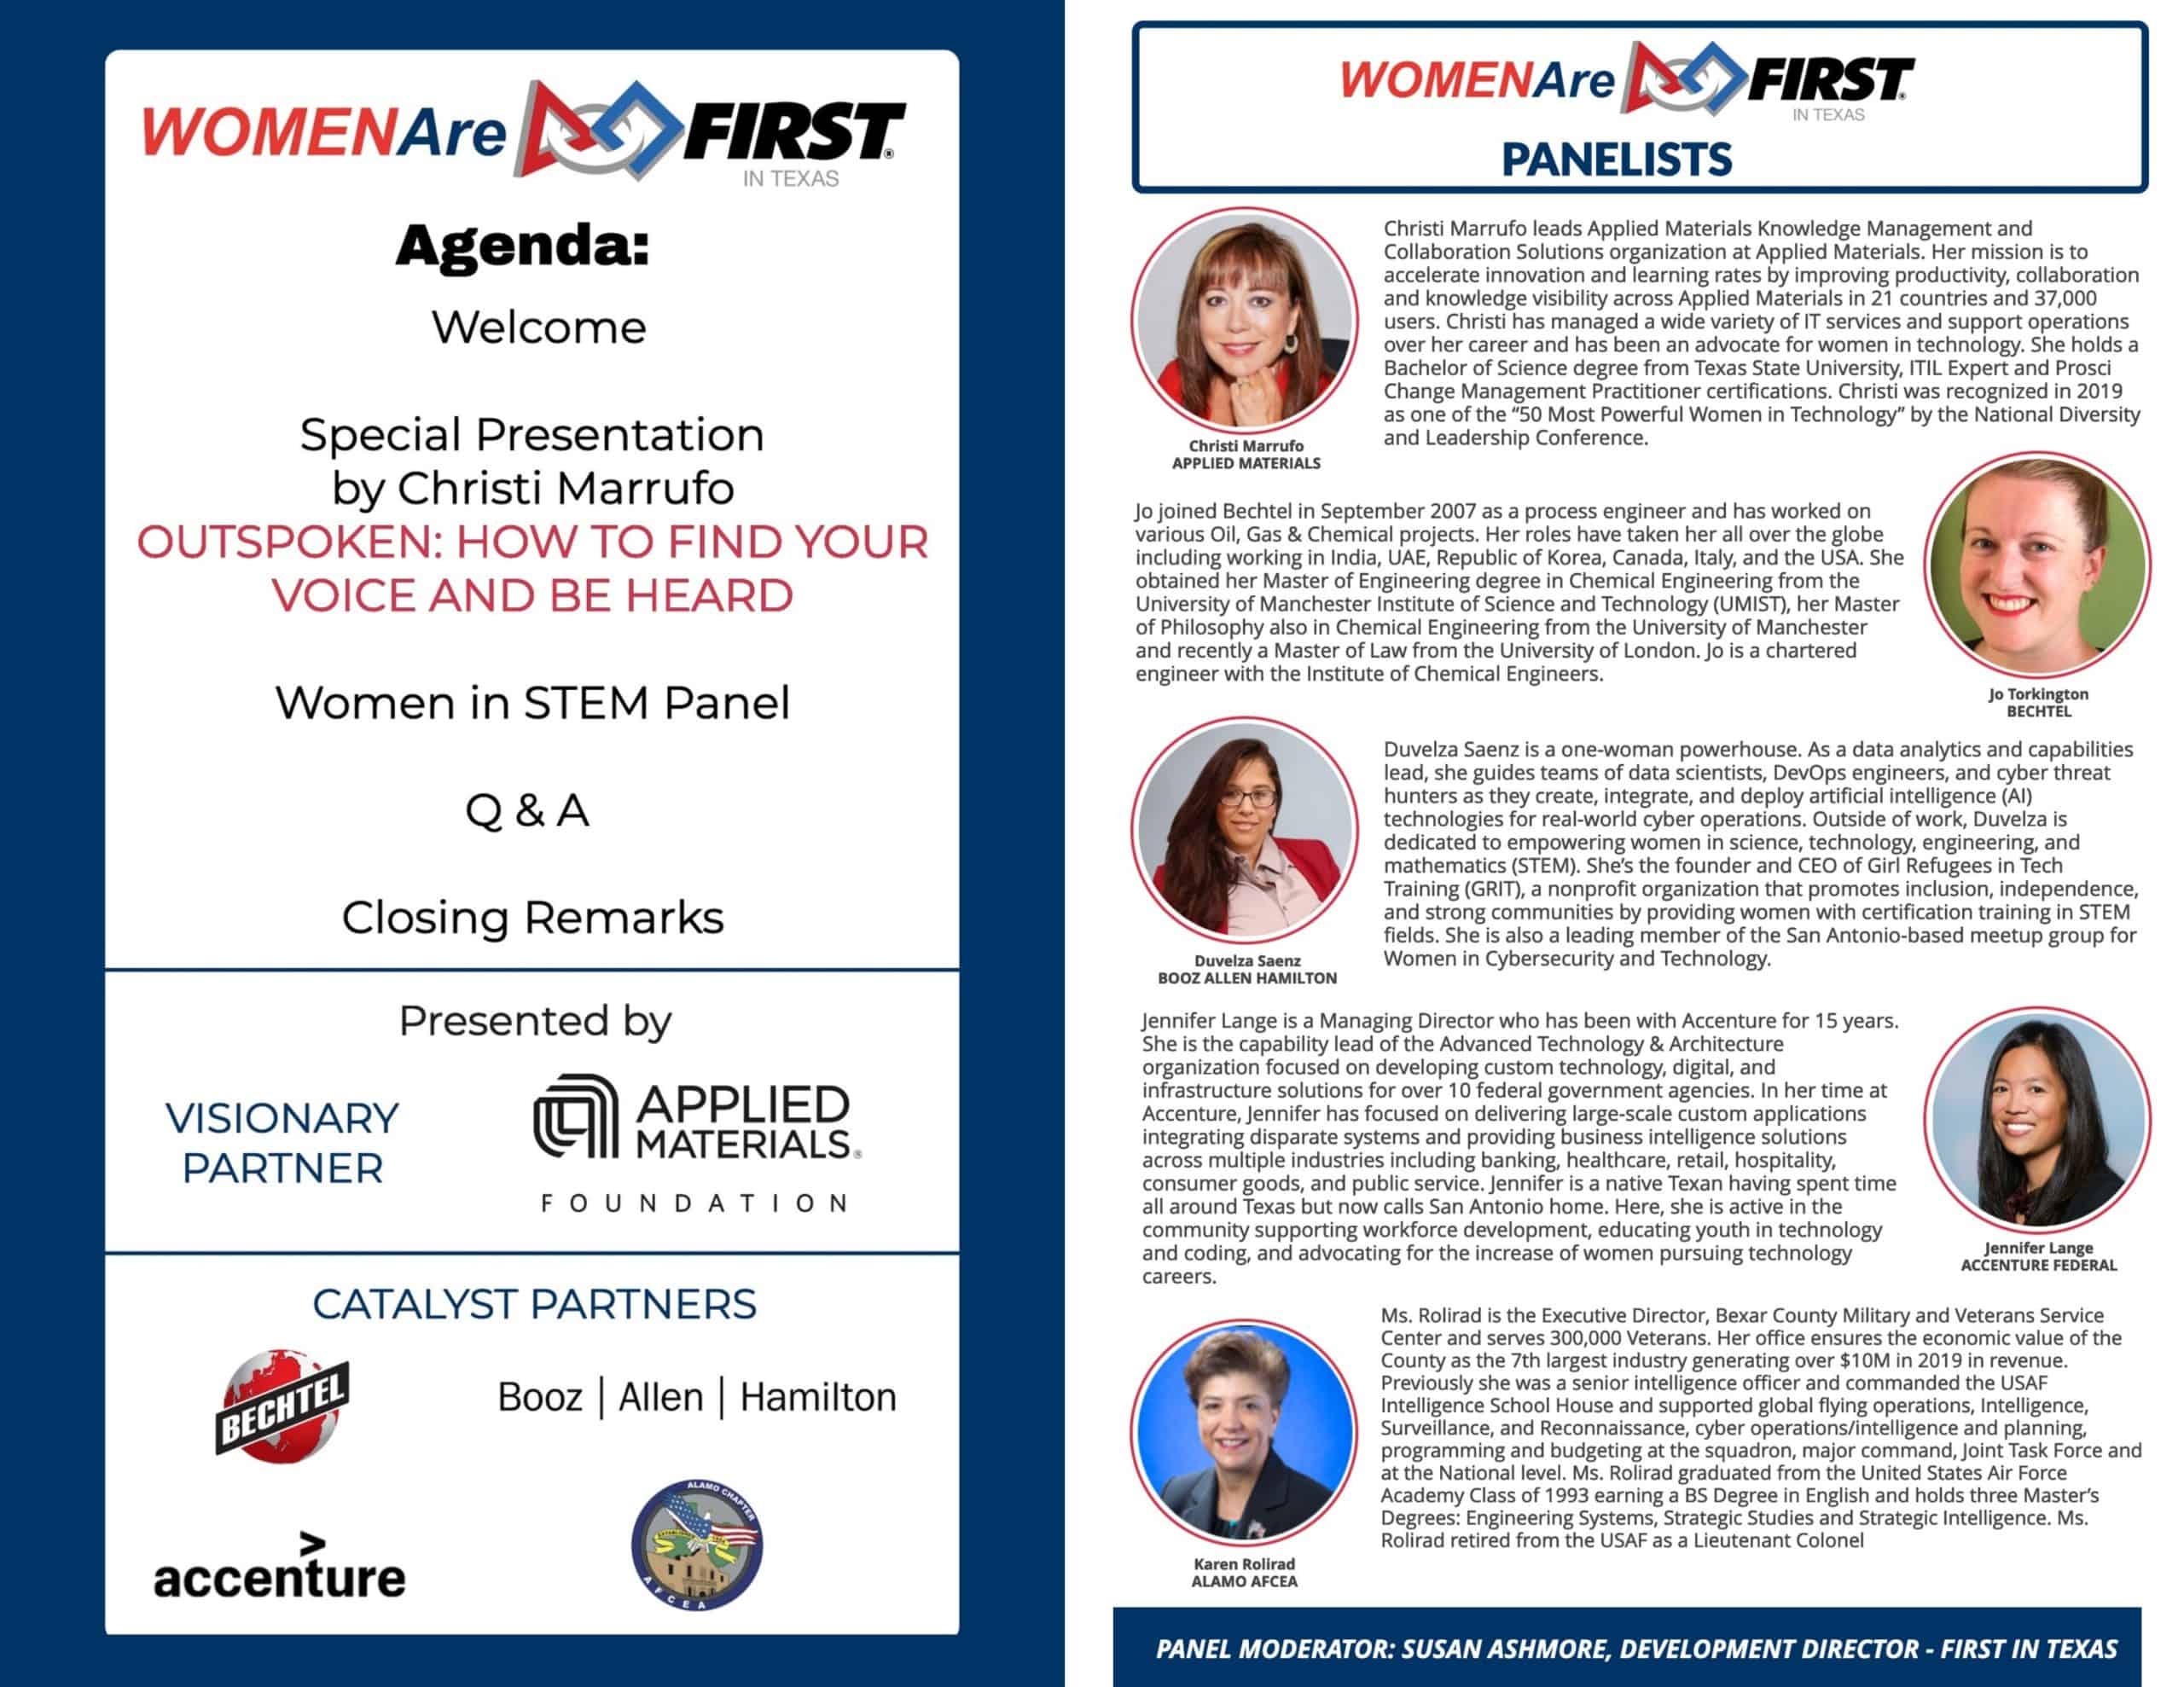 Women Are FIRST in Texas 2020 Agenda and Panelist Program